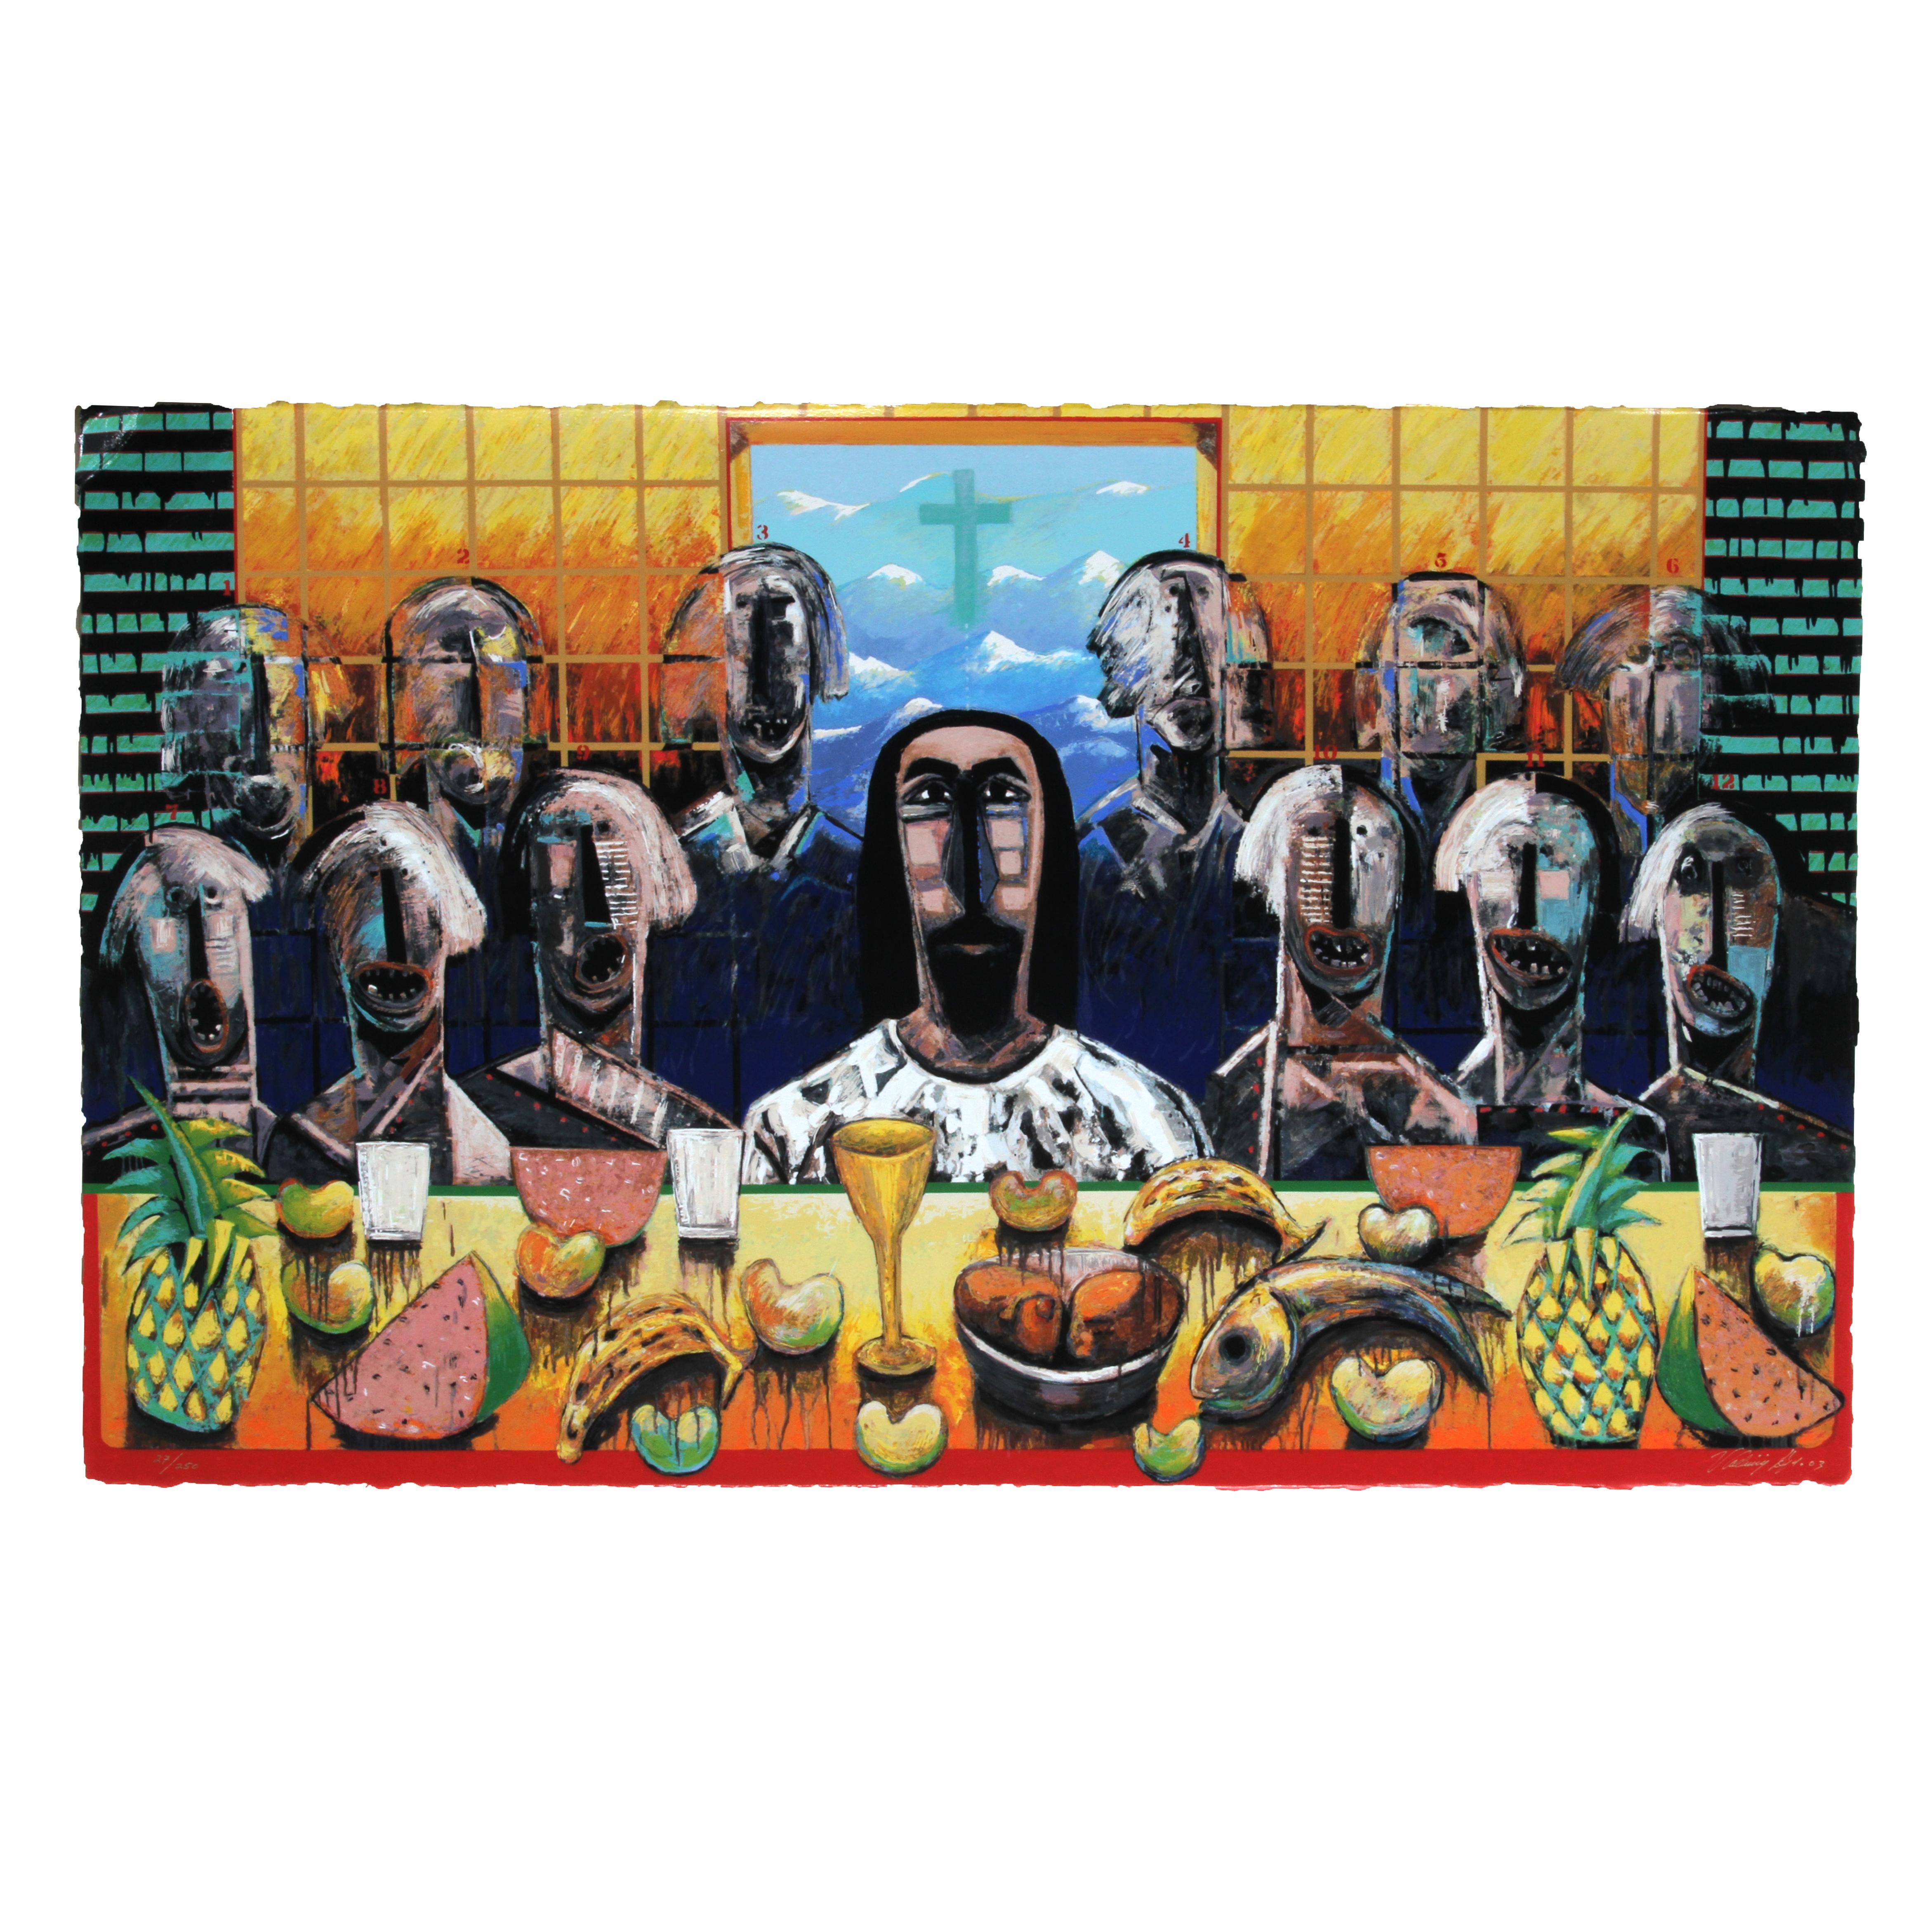 Serigraphs are of the highest quality with deckle edge.
Edition size is 250
Complete 250 edition is now available for the first time.
Size: 29.5 in. x 50 in.
All pieces are signed and numbered.

Vladimir Cora's La Ultima Asemblea (The Last Supper)